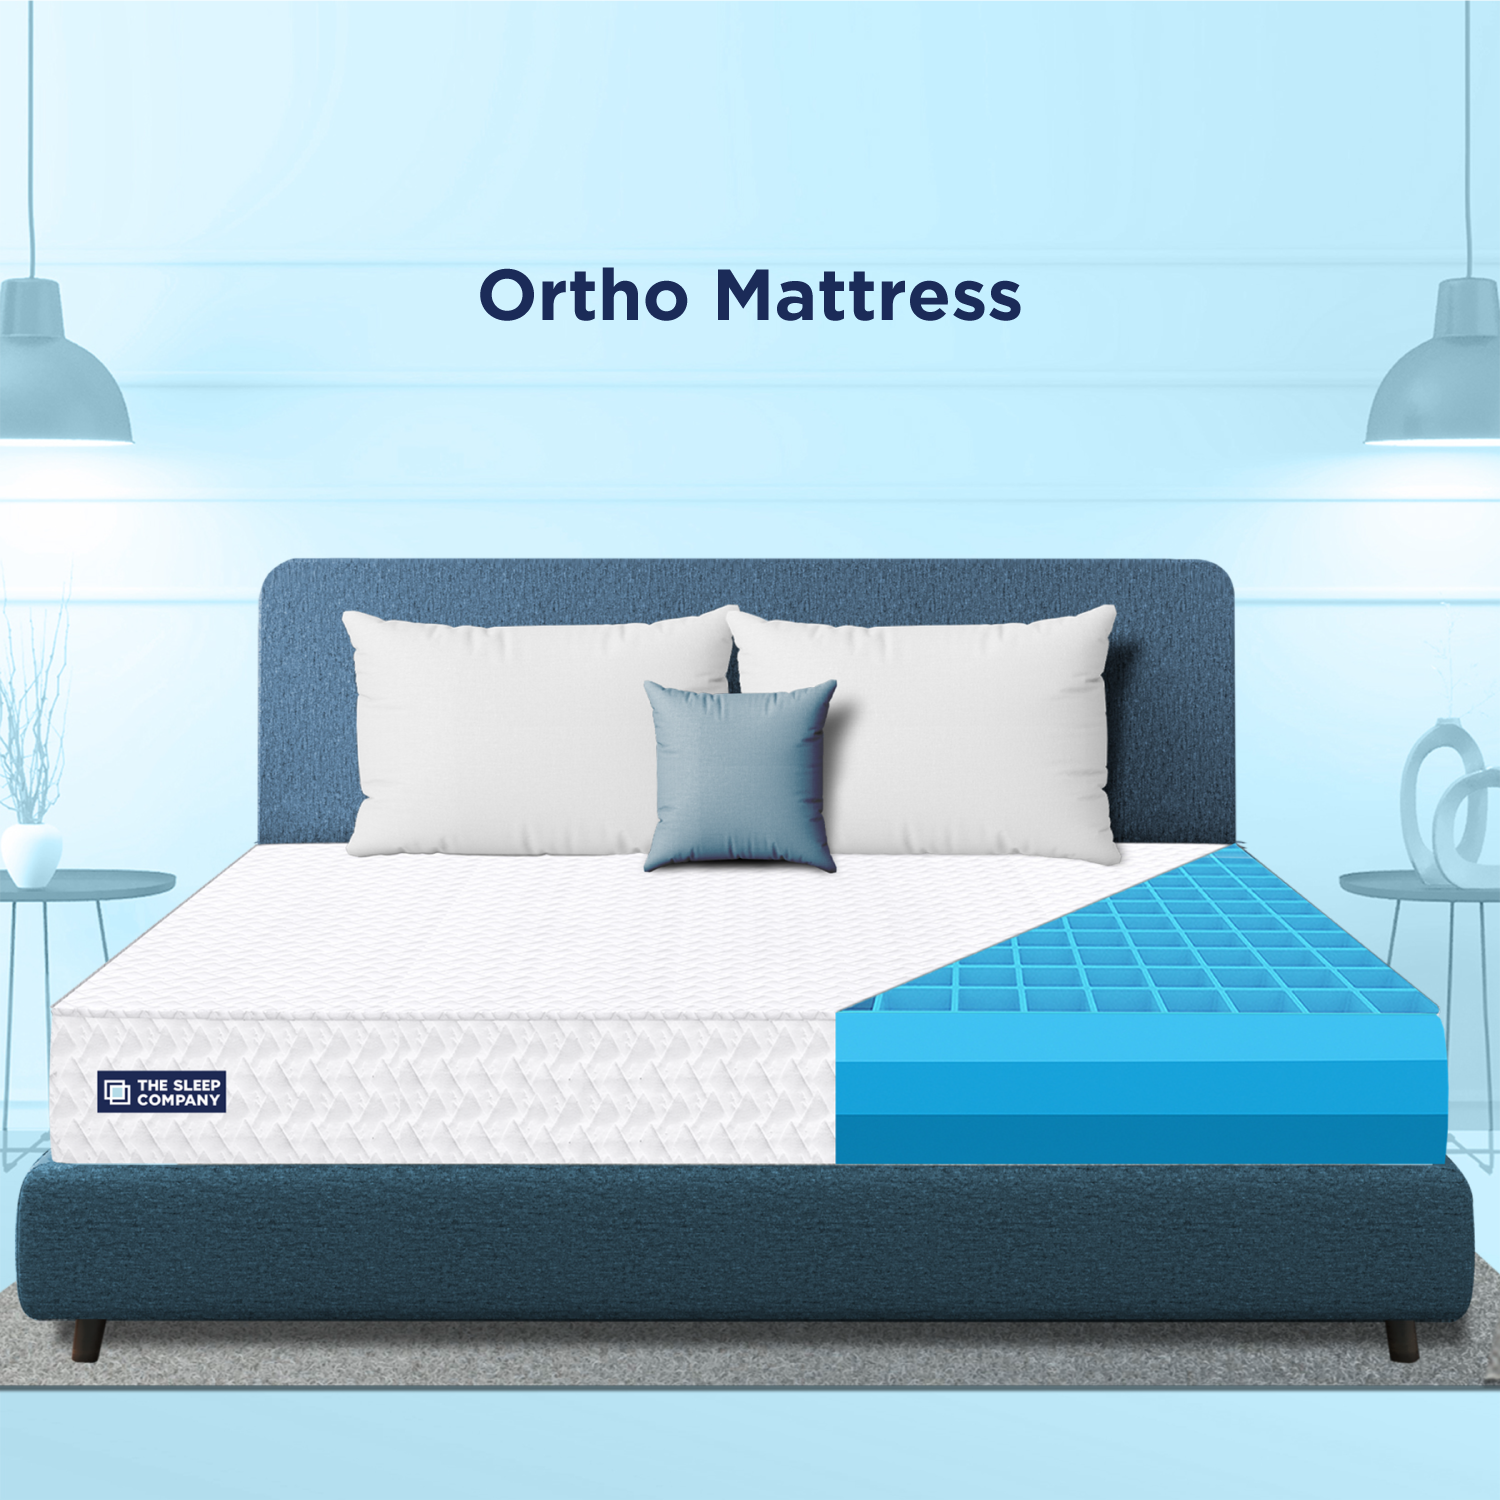 Extra color options for smart ortho mattress